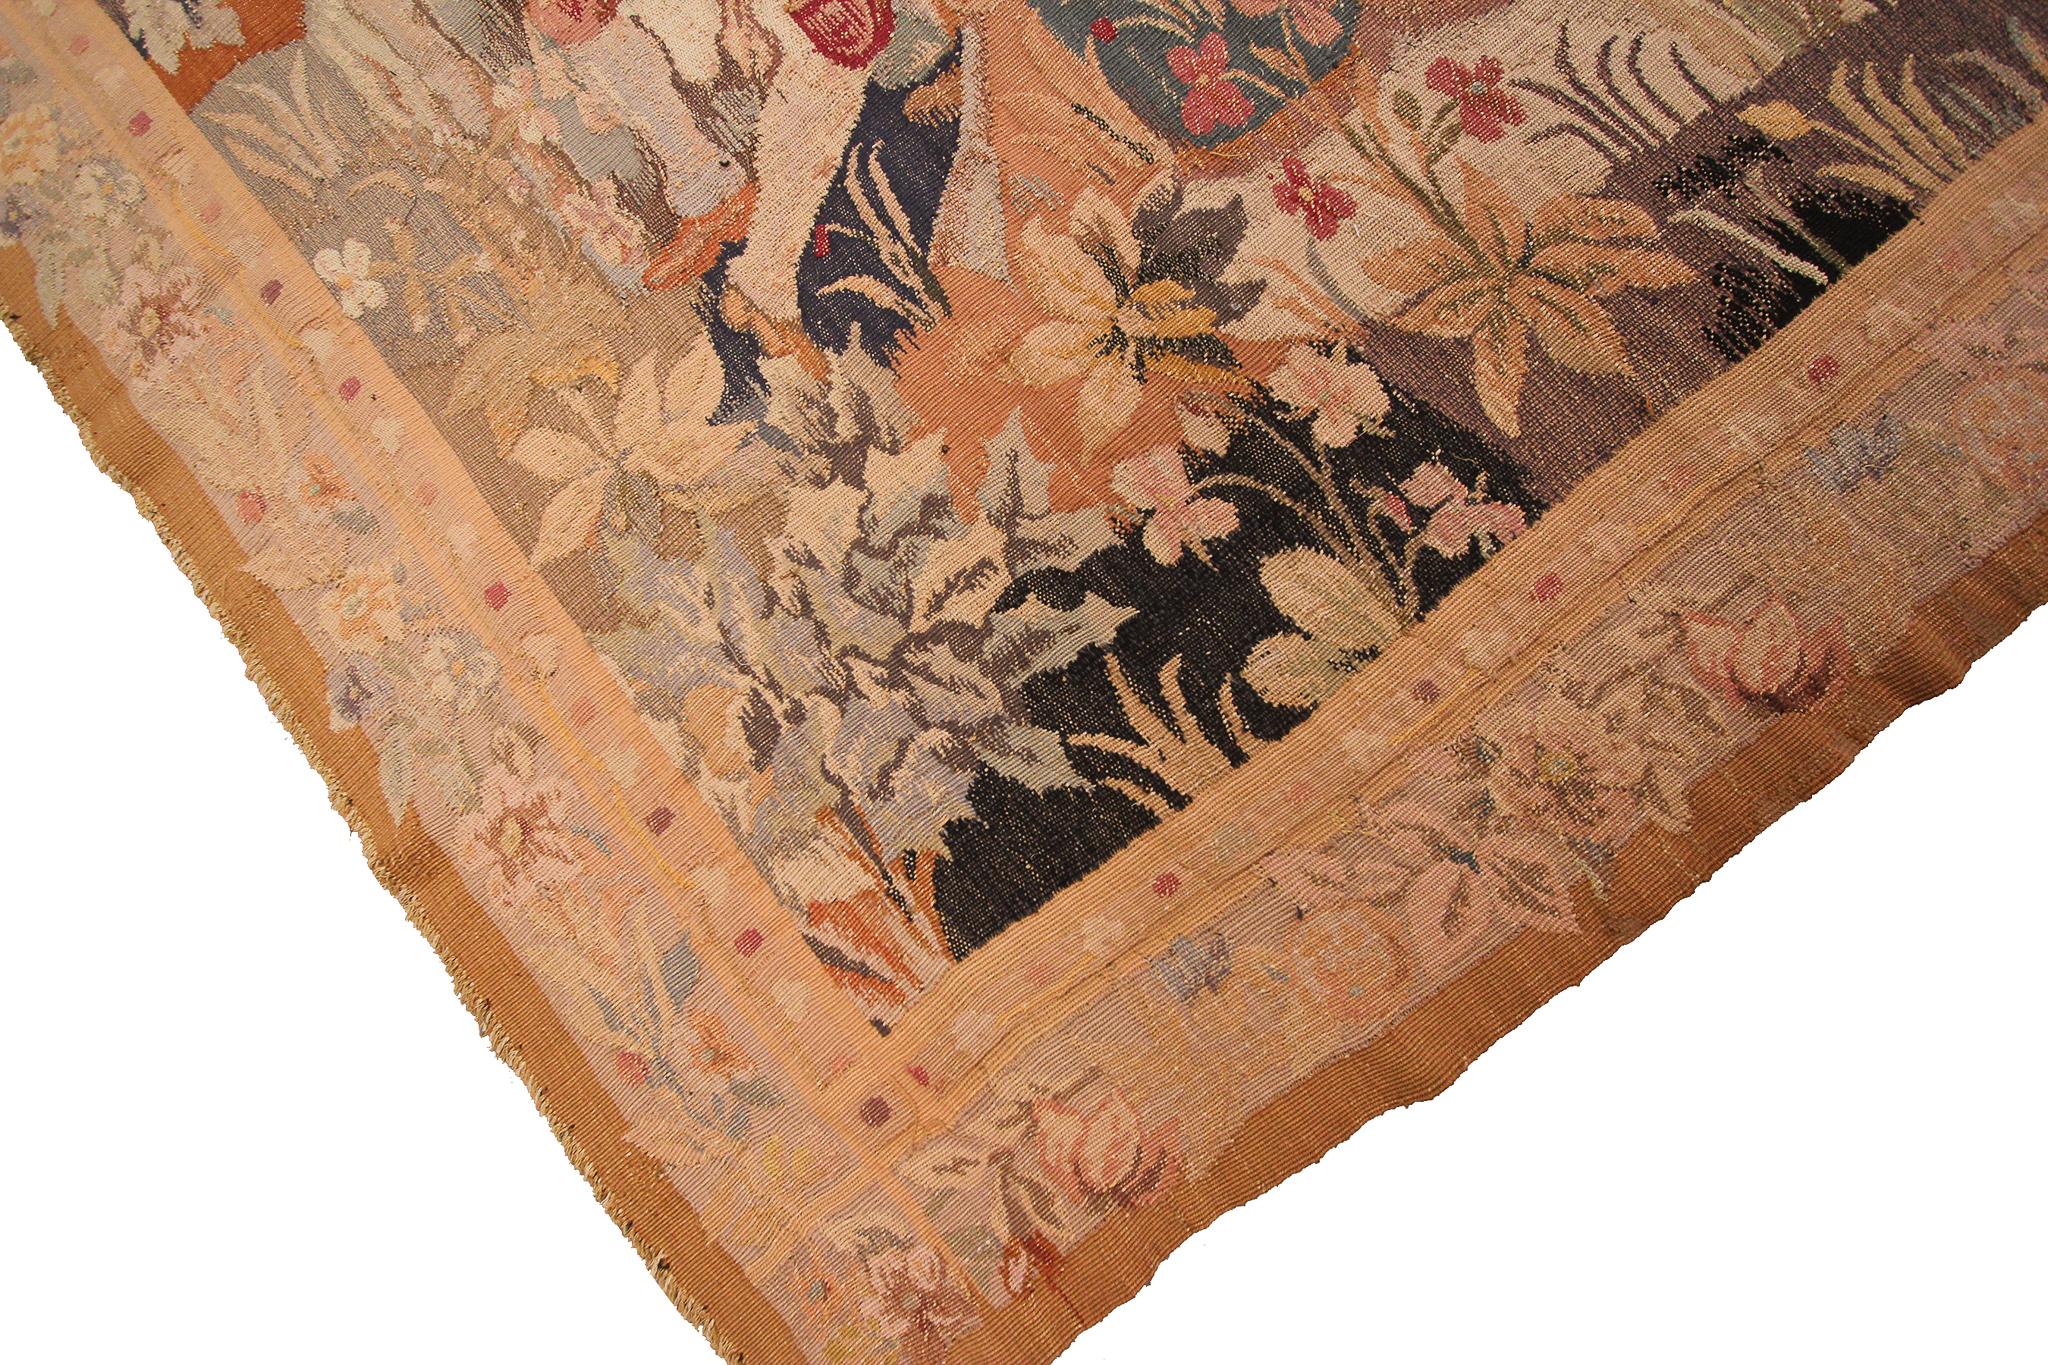 Wool Antique French Tapestry Handwoven French Tapestry Aubusson Verdure Tapestry For Sale